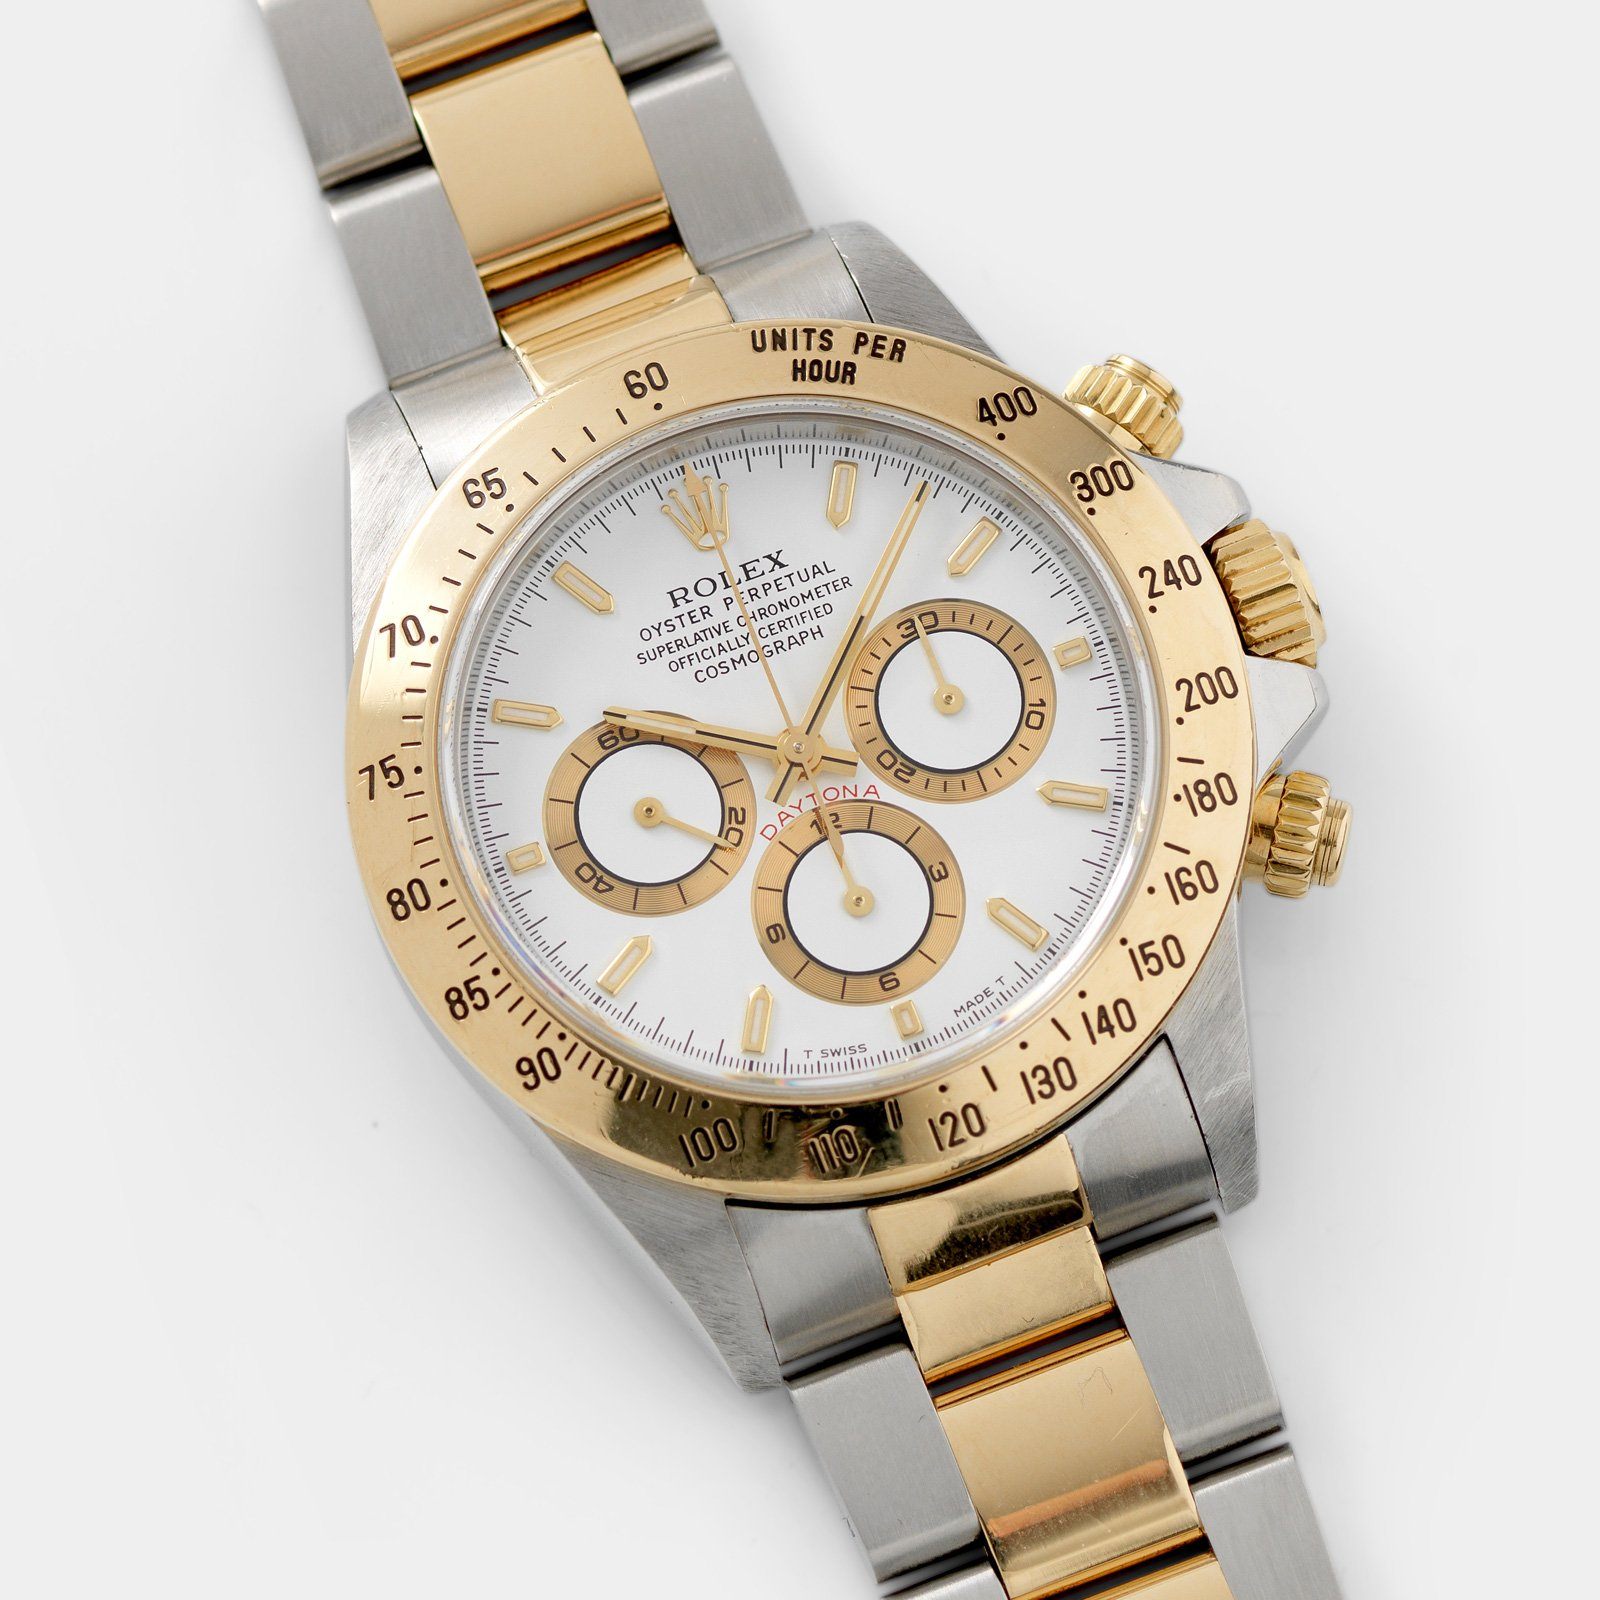 Rolex Daytona 16523 White Dial with Box and Papers